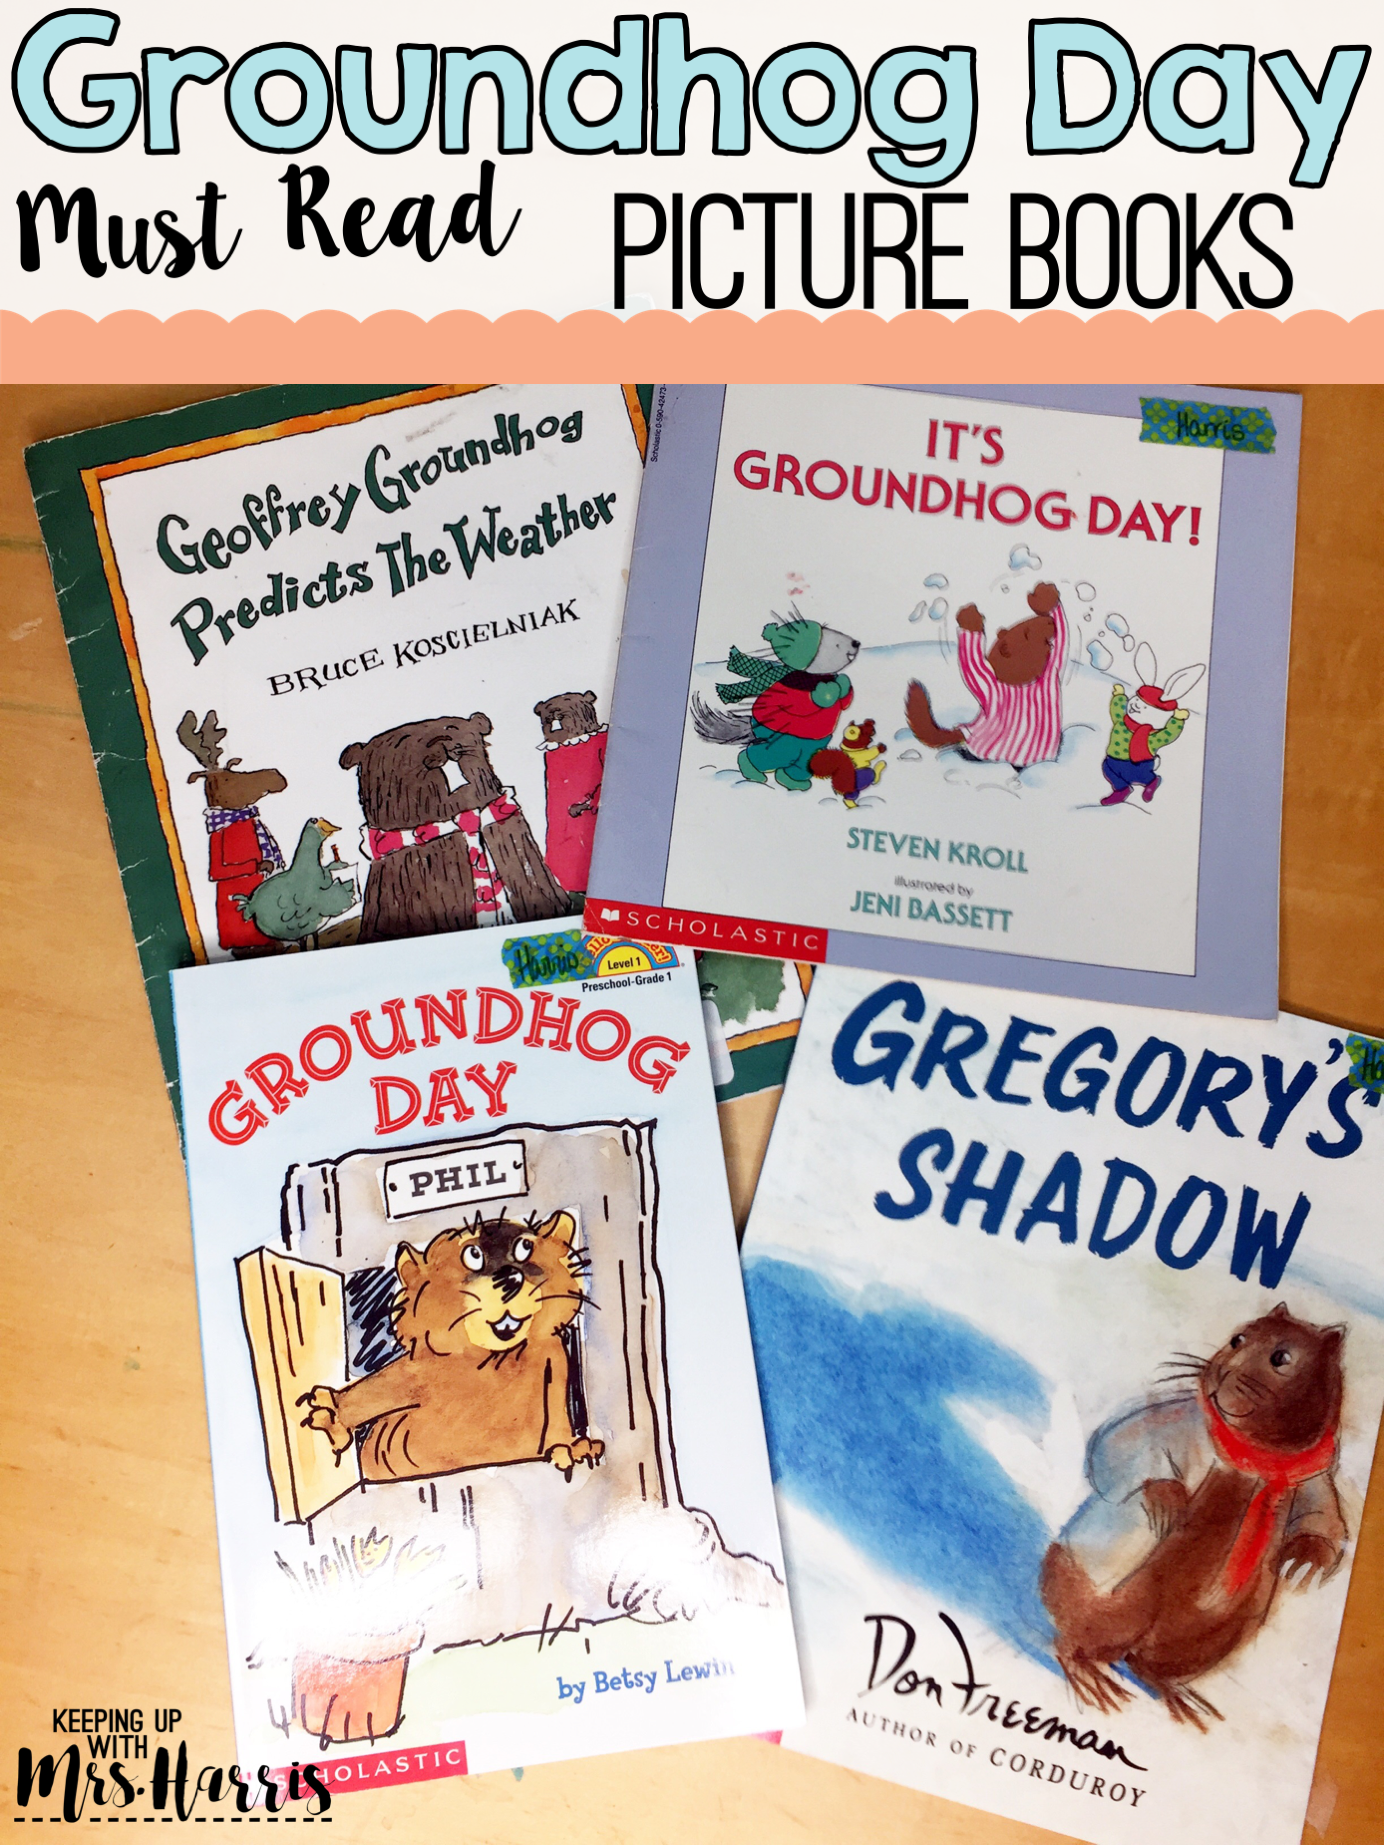 Groundhog Day Picture Books - Read Alouds for Groundhog Day